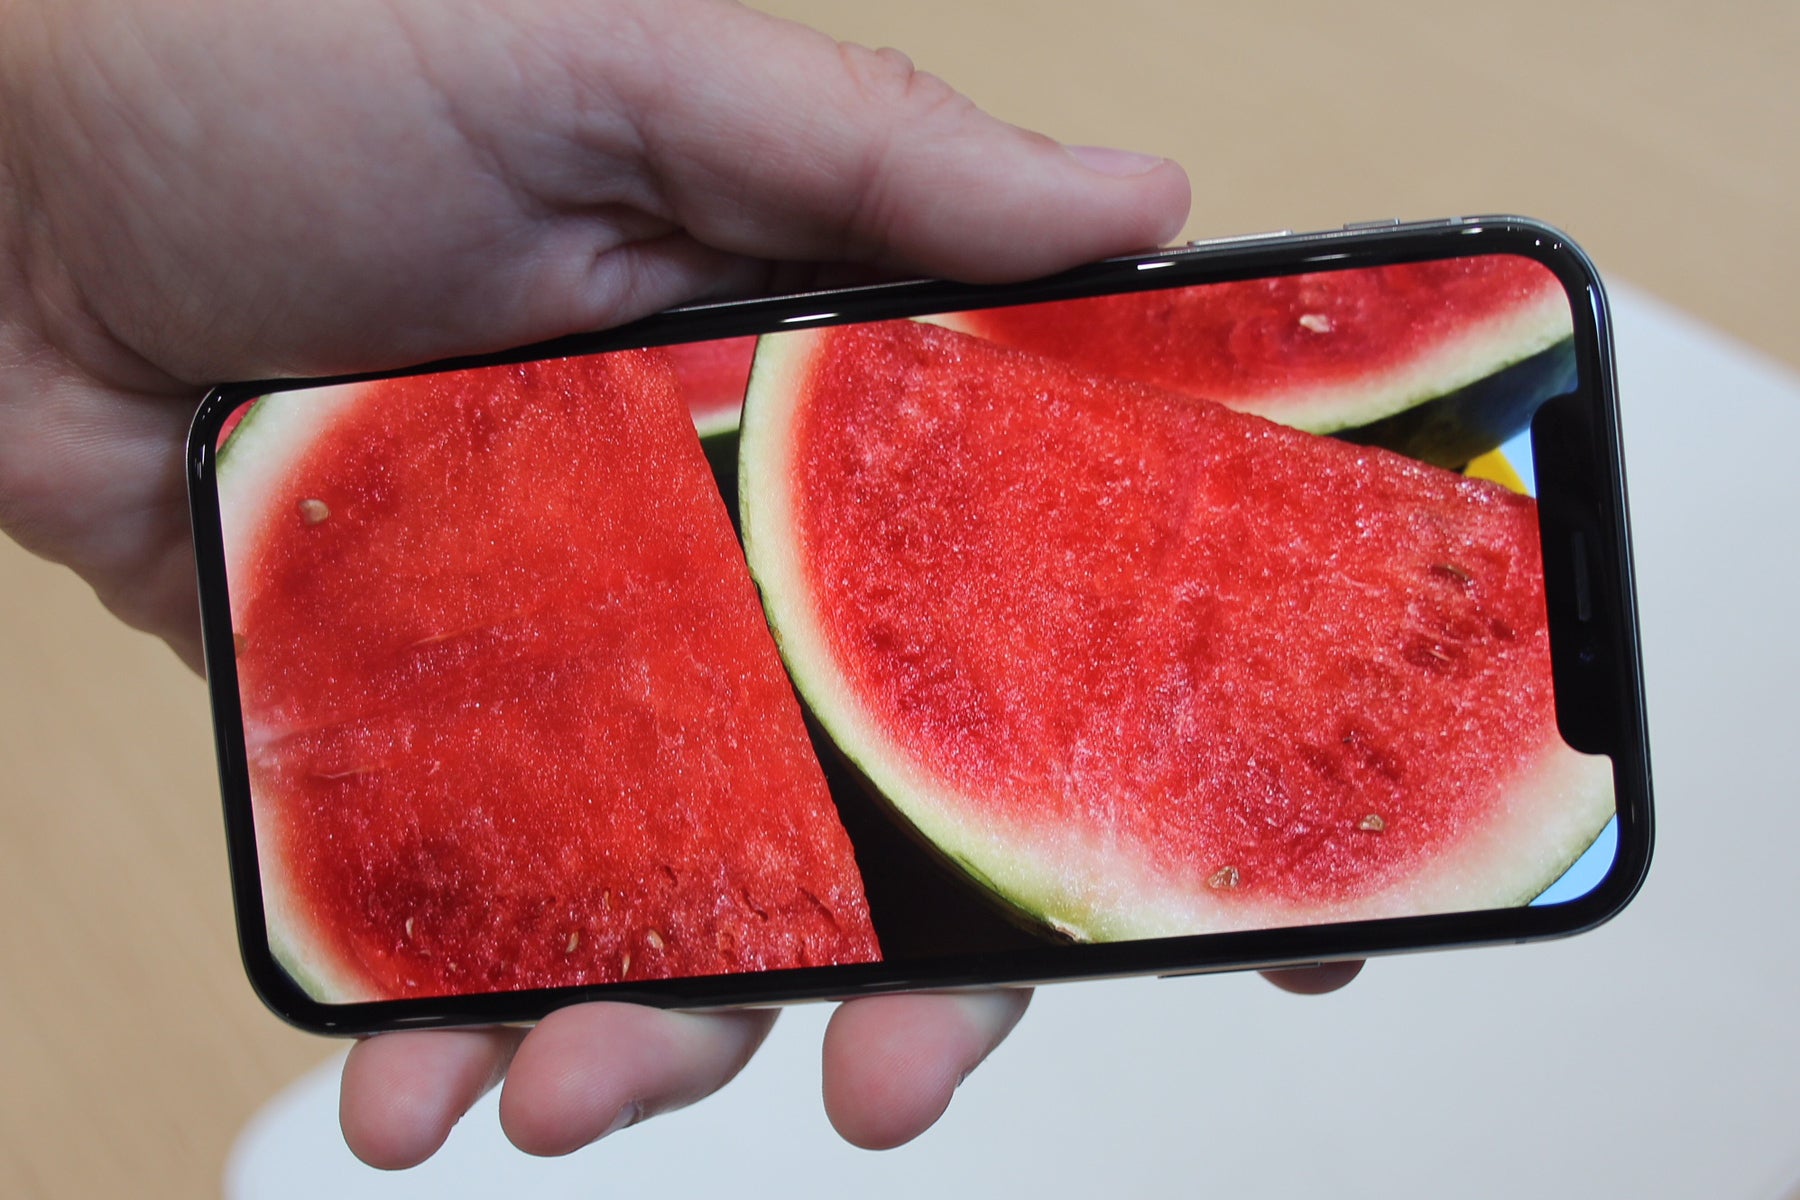 iPhone X: Hands-on and first impressions with Apples new iPhone | Macworld